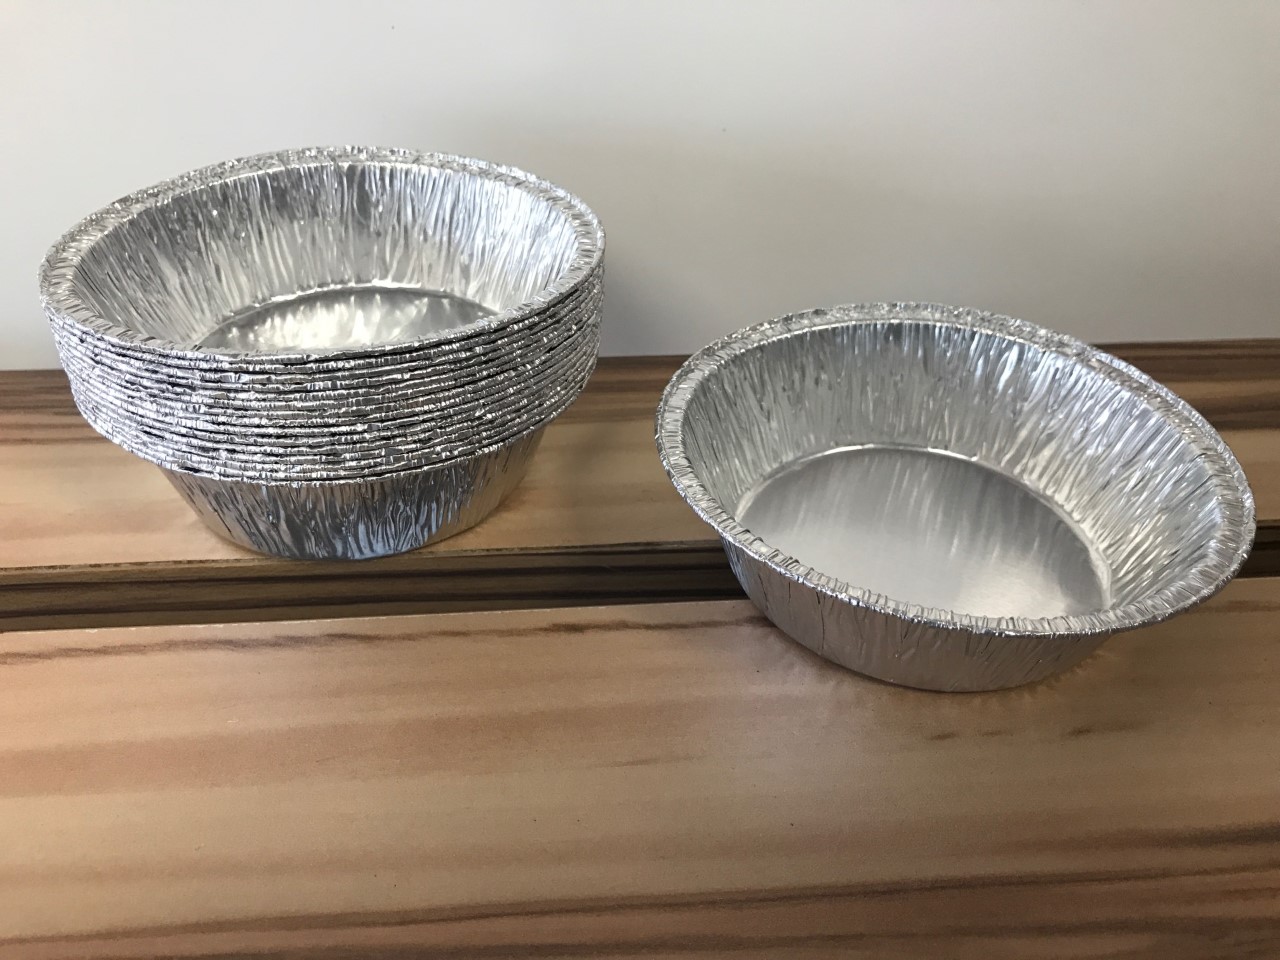 Foil Pie Tins 25mm x 100mm (Ideal for Pork Pies) x 20 Pack